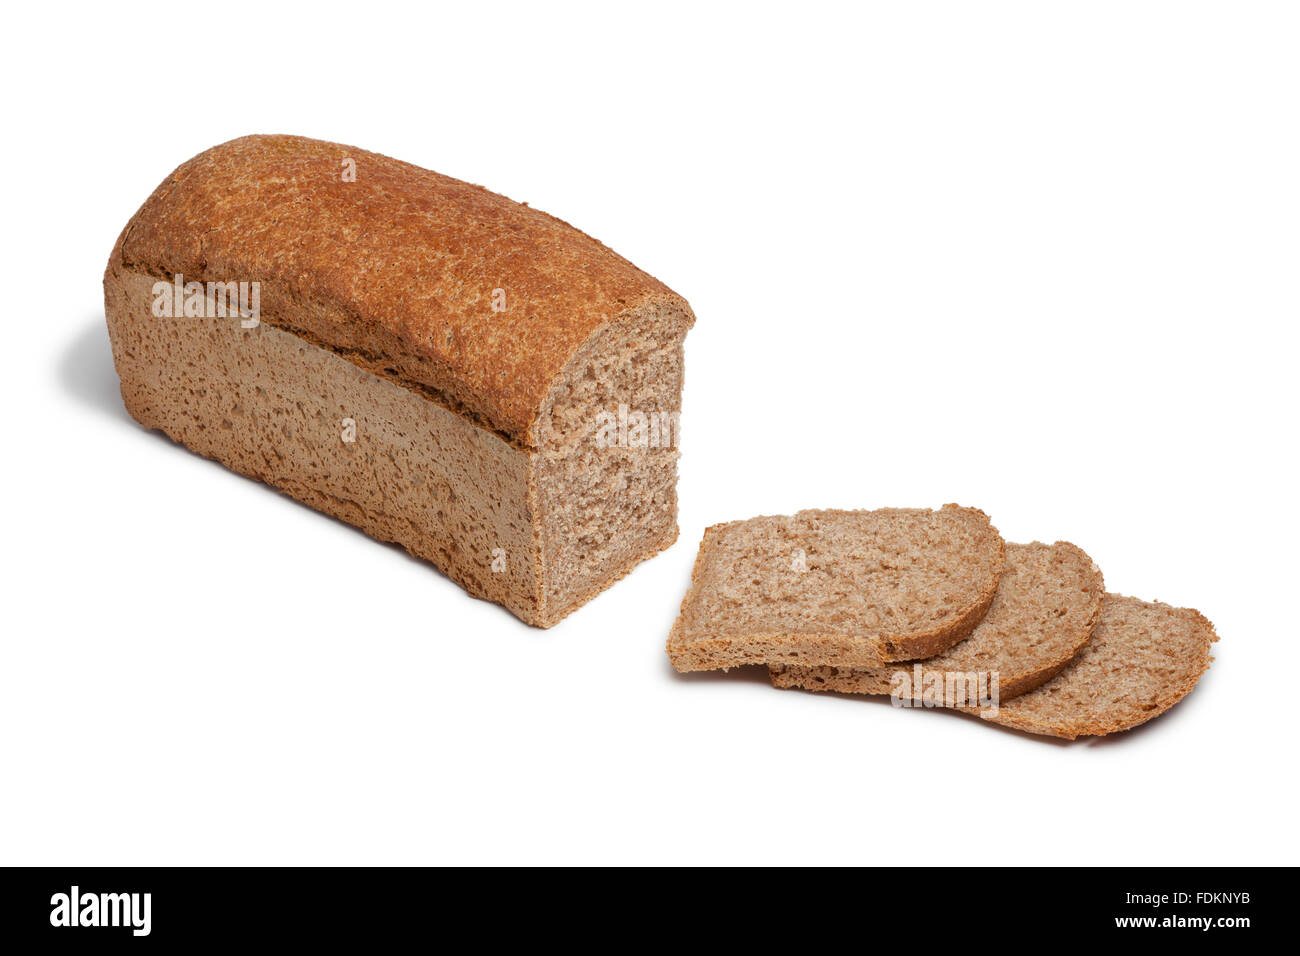 Loaf of spelt bread and slices on white background Stock Photo